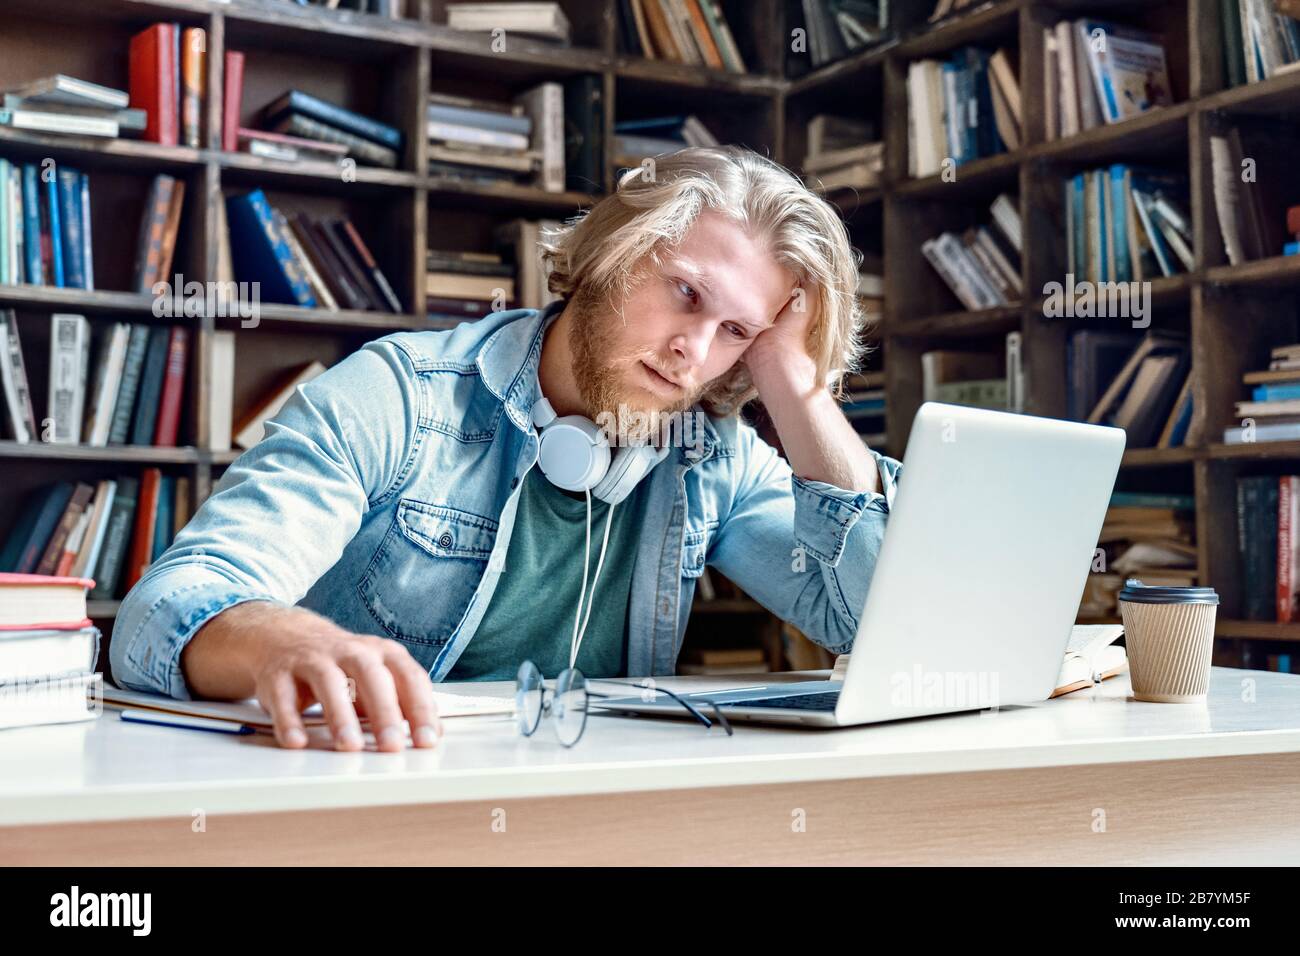 Unhappy bored male student studying looking at laptop. Stock Photo